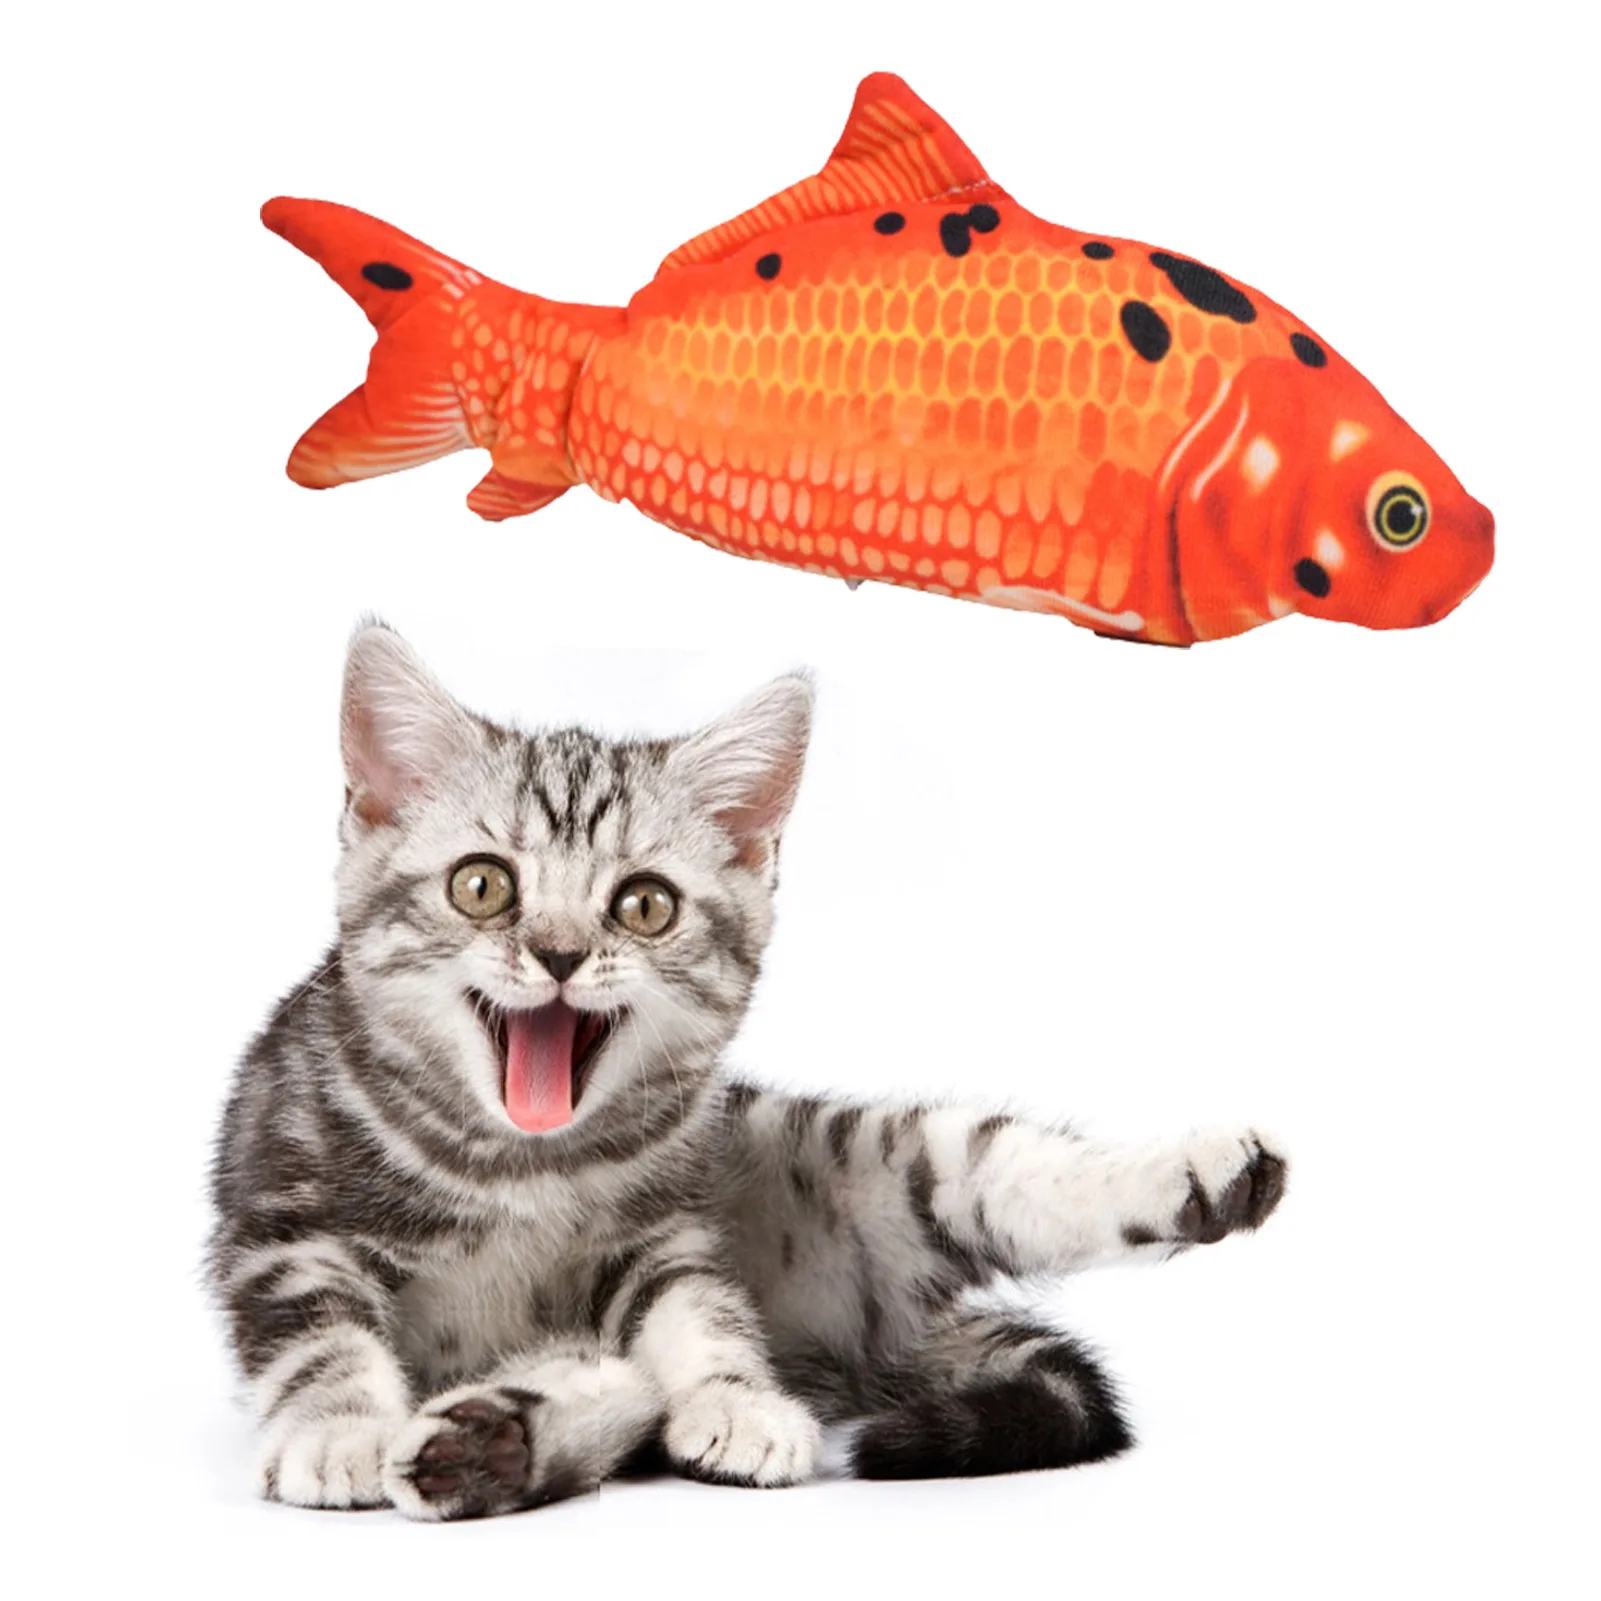 

New Cat USB Charger 3D Floppy Fish Interactive Electric Toy Realistic Plush Simulation Wiggle Fish Catnip Indoor Chewing Playing